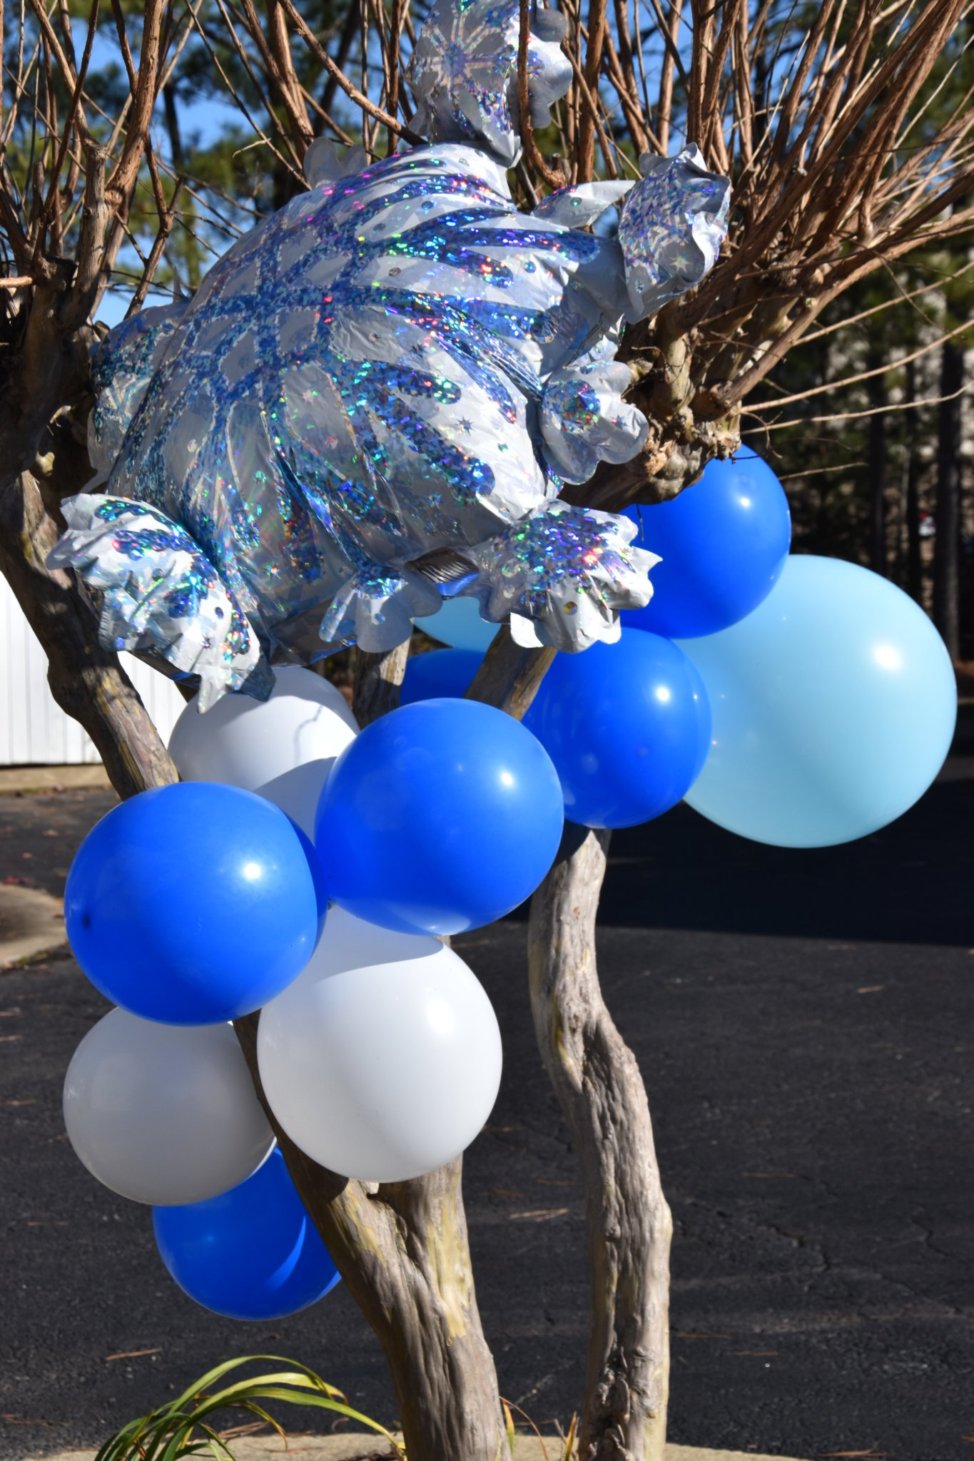 White and blue balloons tied to a tree in a parking lot